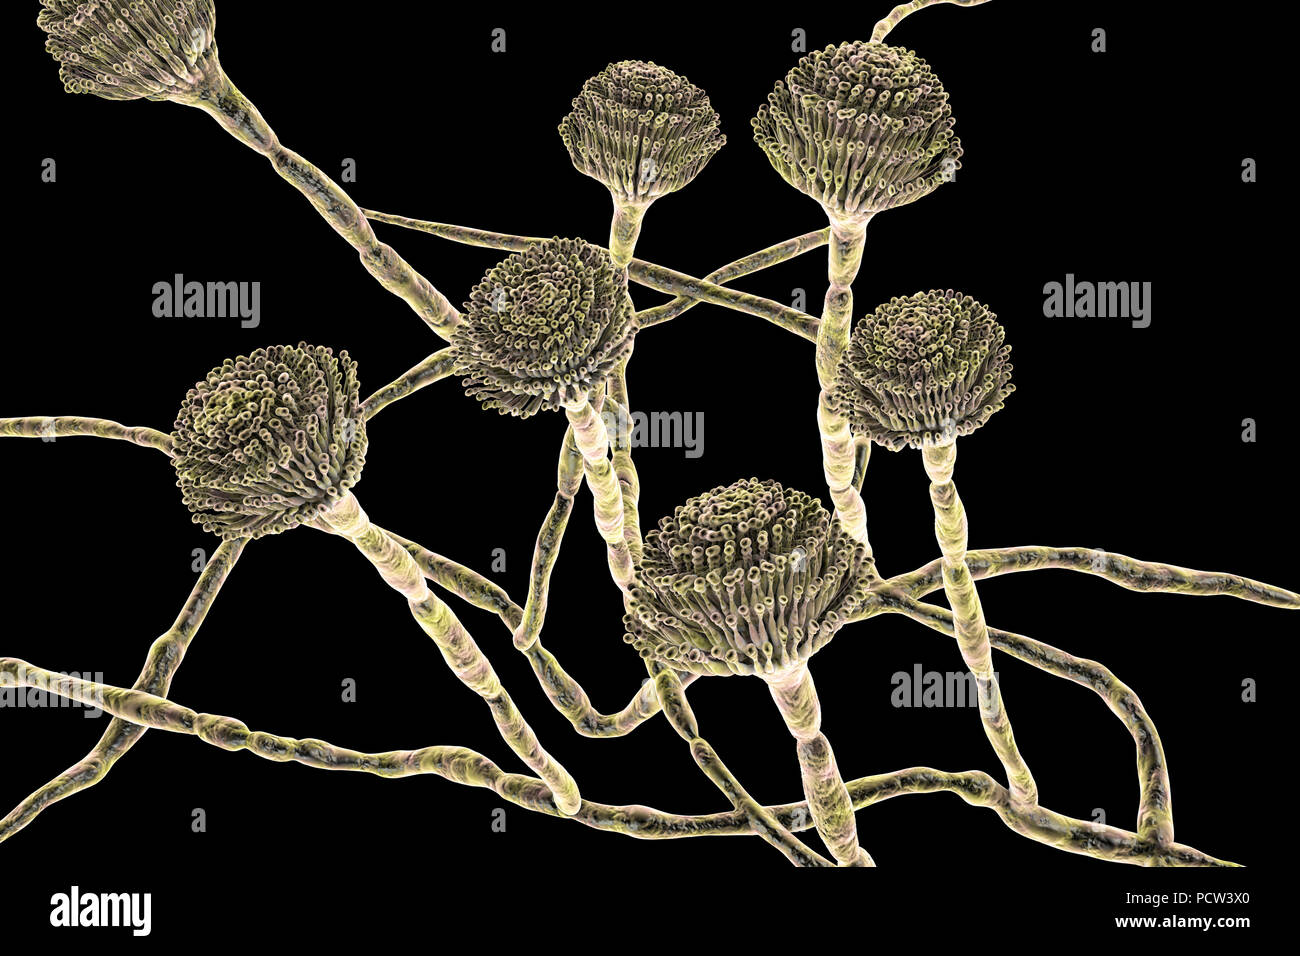 Computer illustration of fruiting bodies (conidiophores) and hyphae of the fungus Aspergillus fumigatus. A. fumigatus is a widely distributed saprophyte which grows on household dust, soil, and decaying vegetable matter, including stale food, hay and grain. Humans and animals constantly inhale numerous conidia of this fungus. A. fumigatus can cause a number of disorders in people with compromised immune function or other lung diseases, including allergy and the serious lung disease aspergillosis. This fungus can also spread to the brain, kidneys, liver and skin. Stock Photo